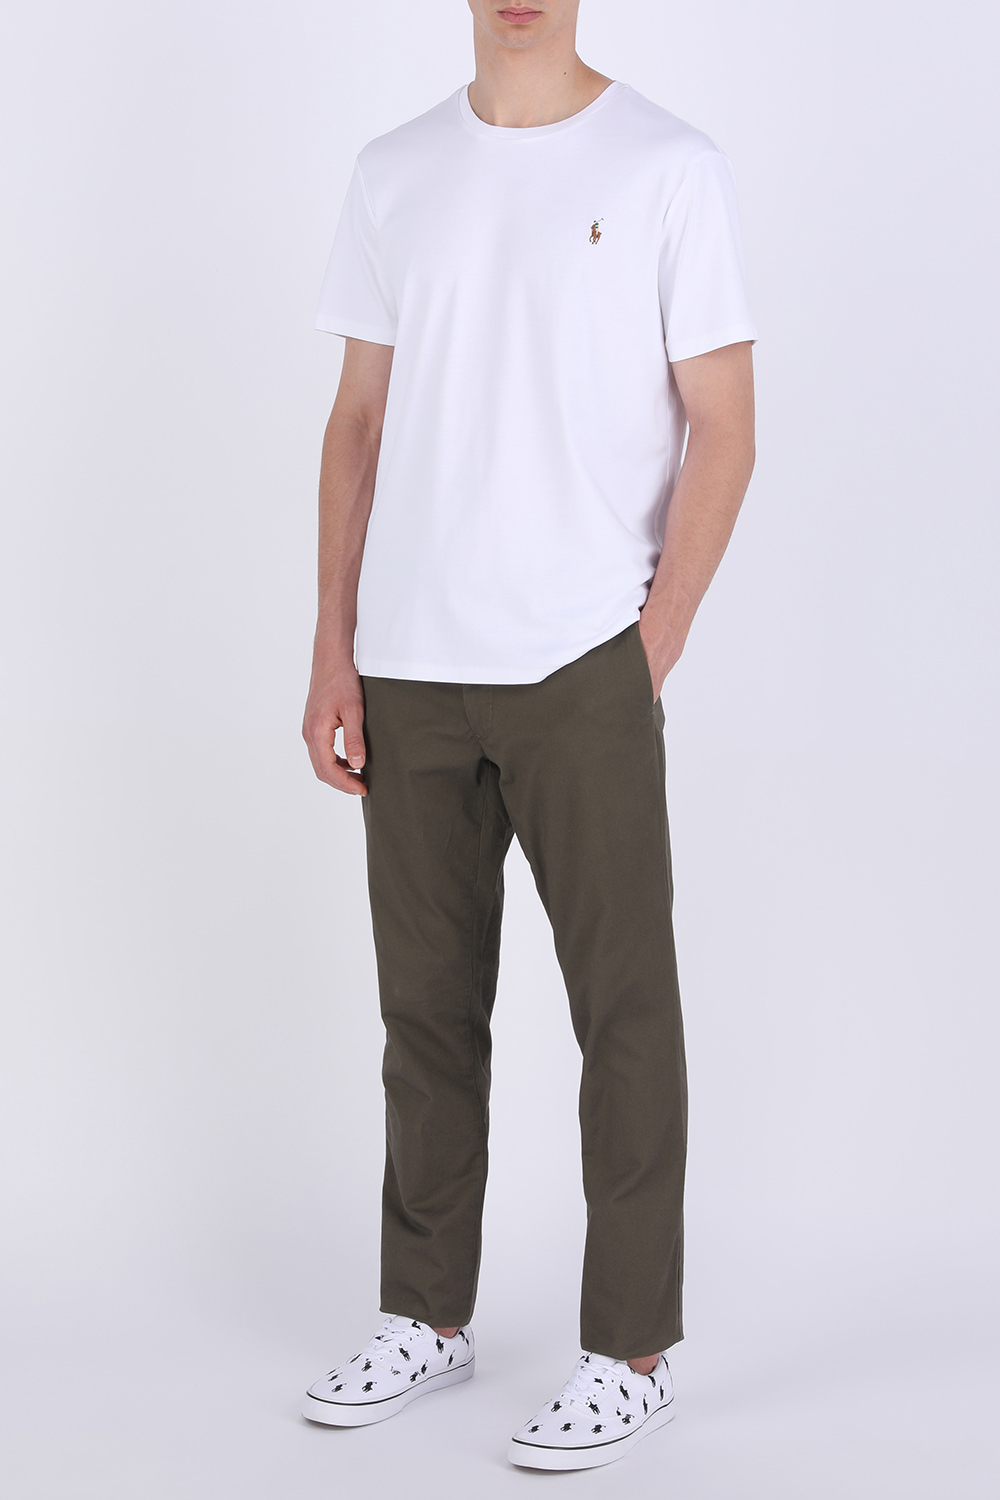 Slim Fit Pants in Army-Green POLO RALPH LAUREN